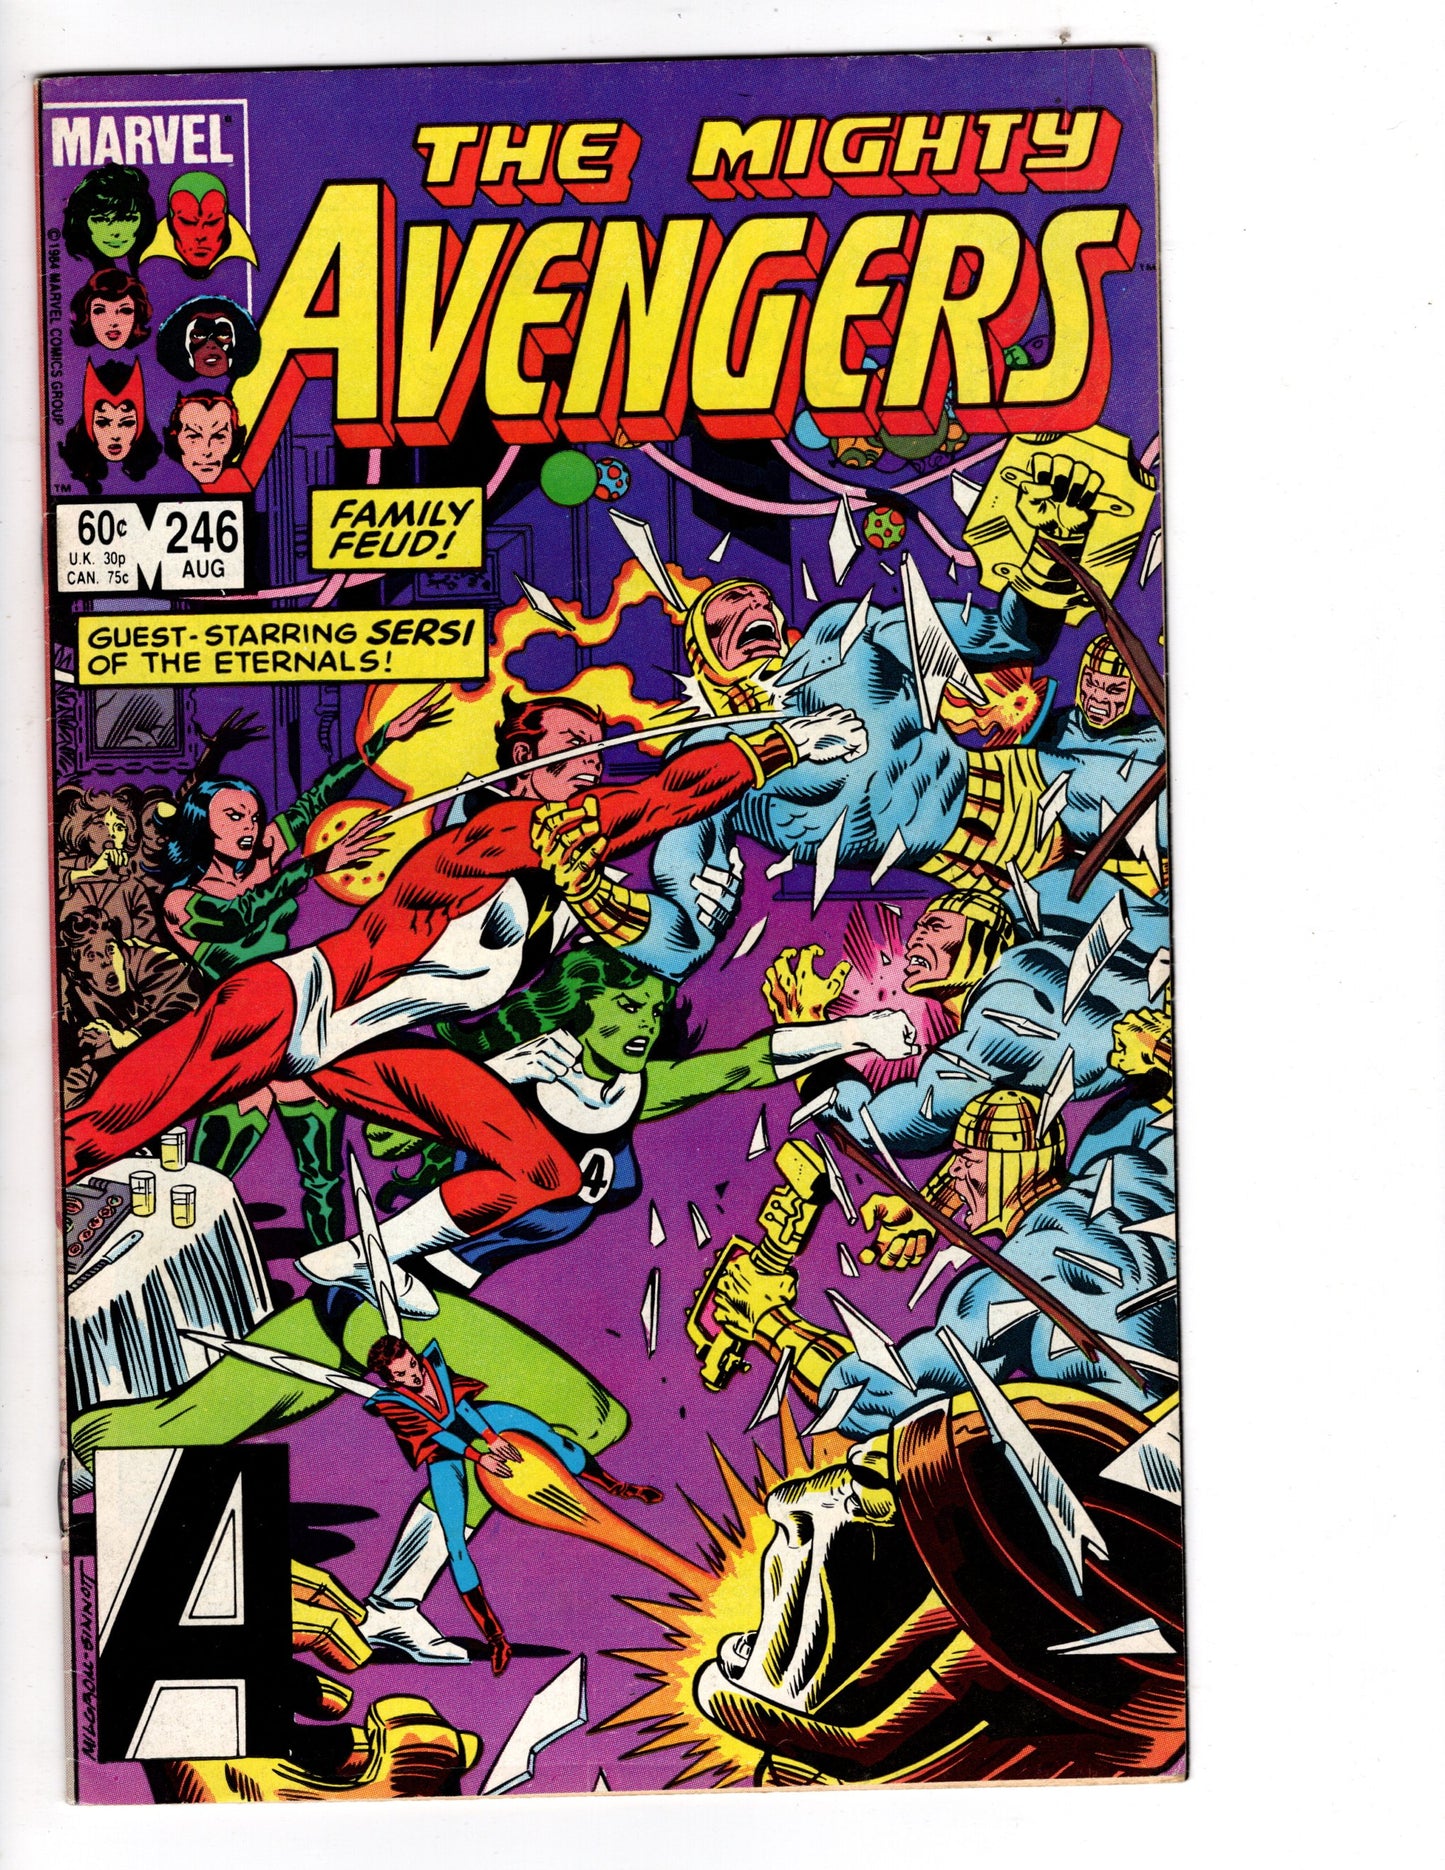 The Mighty Avengers #246